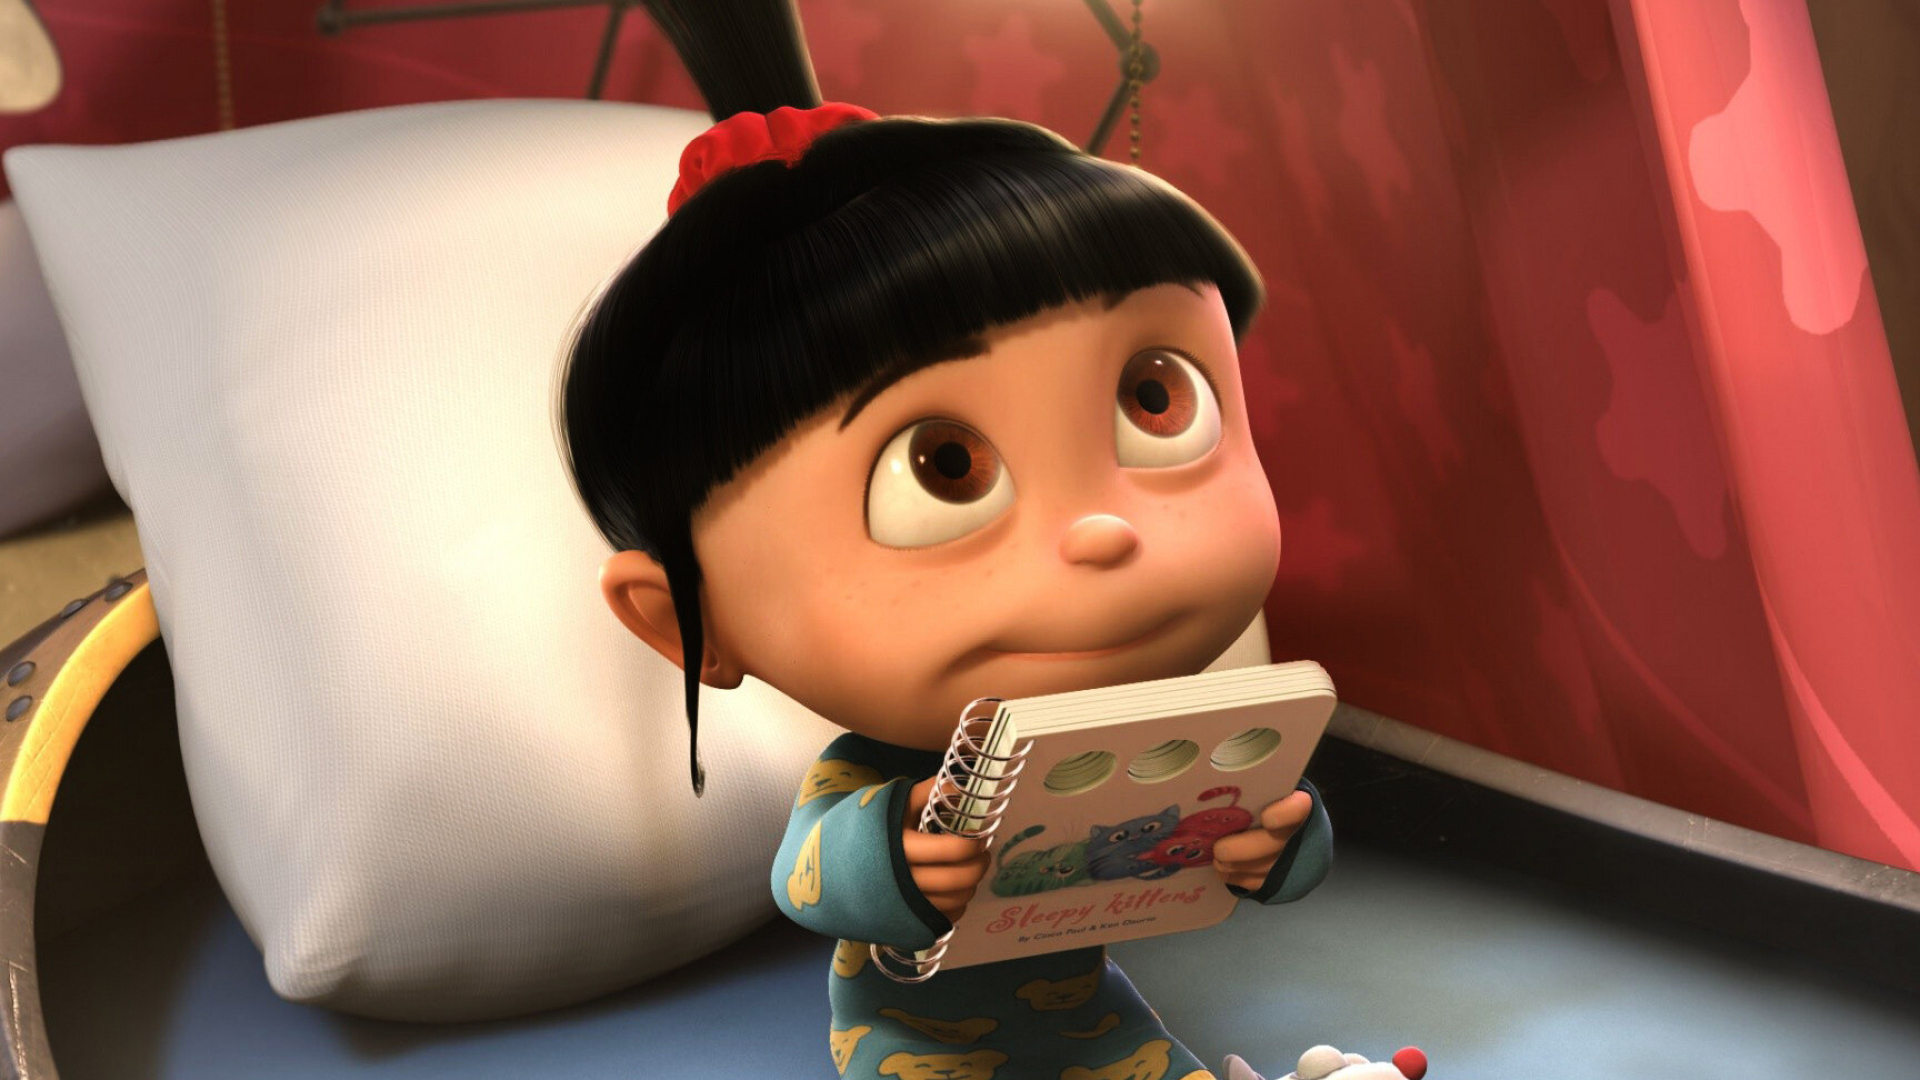 Despicable Me: Agnes, Produced by Illumination Entertainment for Universal Pictures. 1920x1080 Full HD Wallpaper.